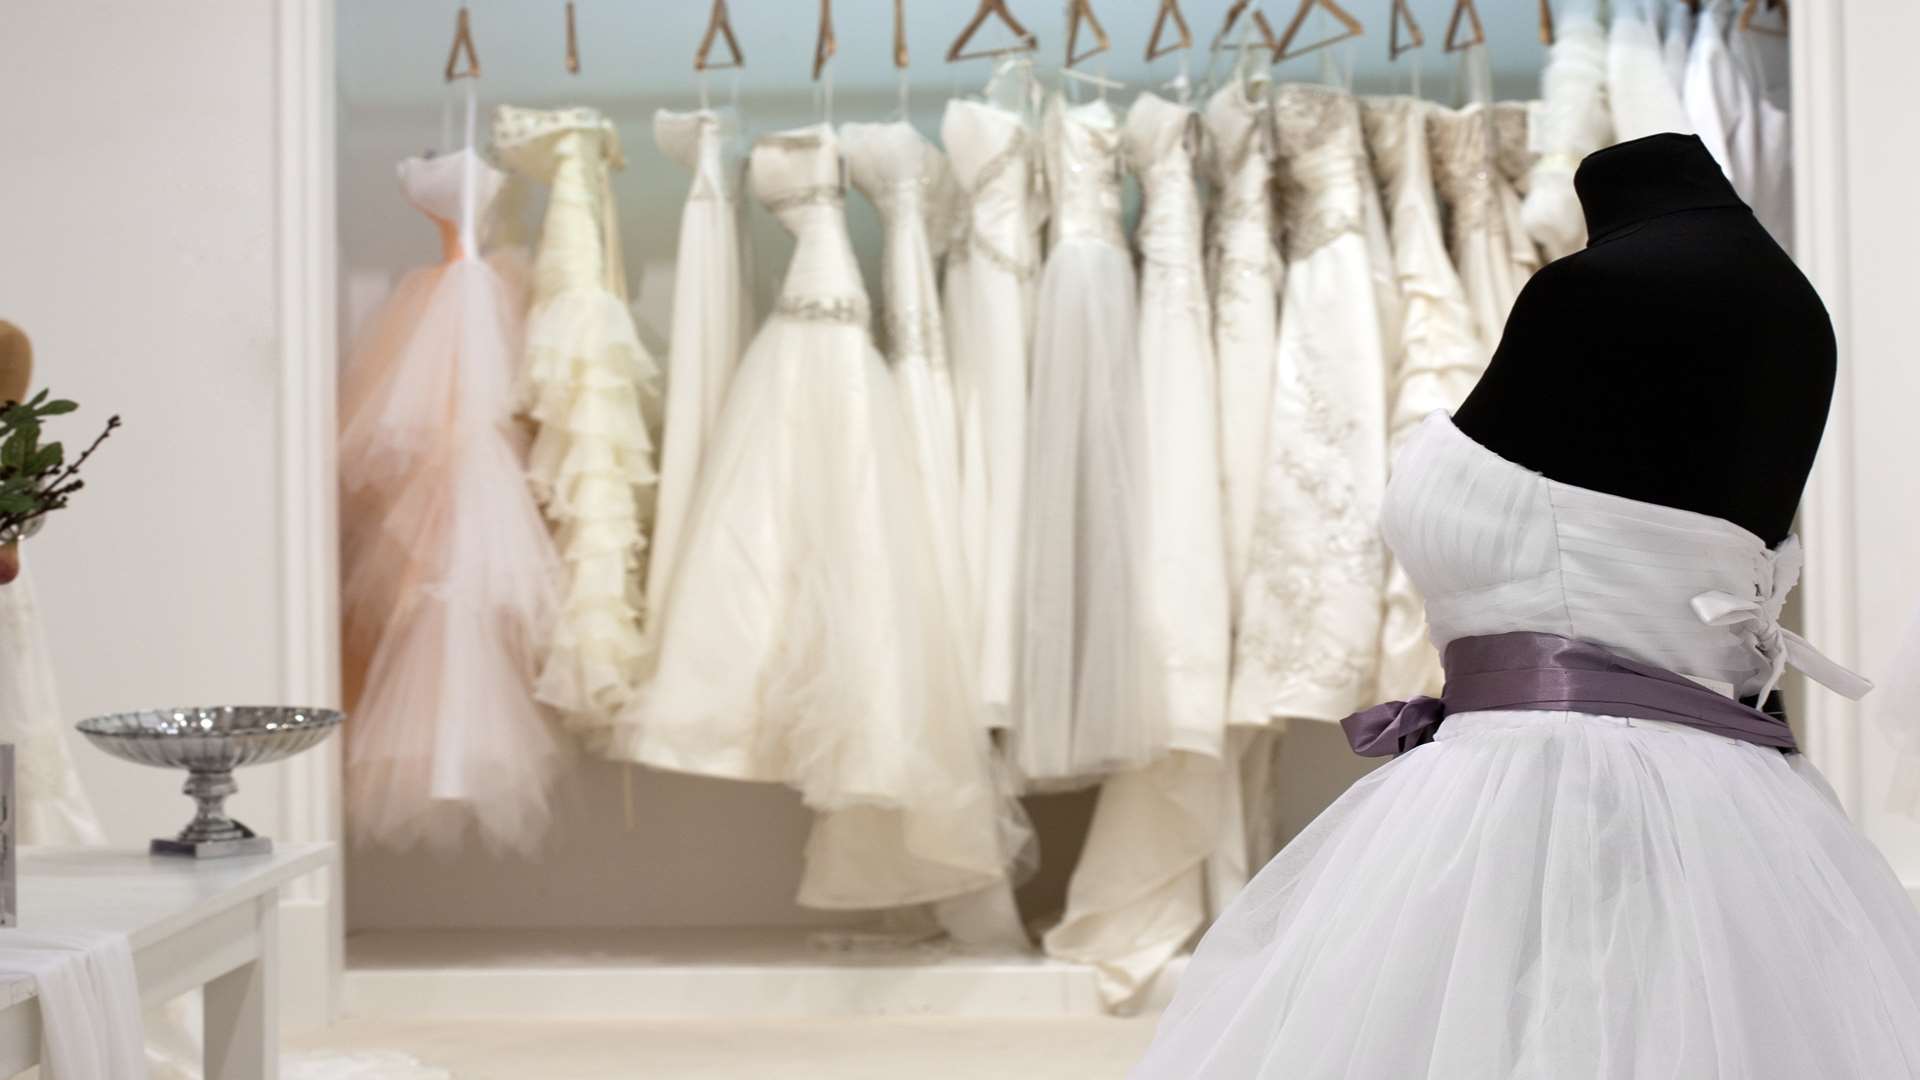 Wedding dresses come in a number of shades of white and ivory.